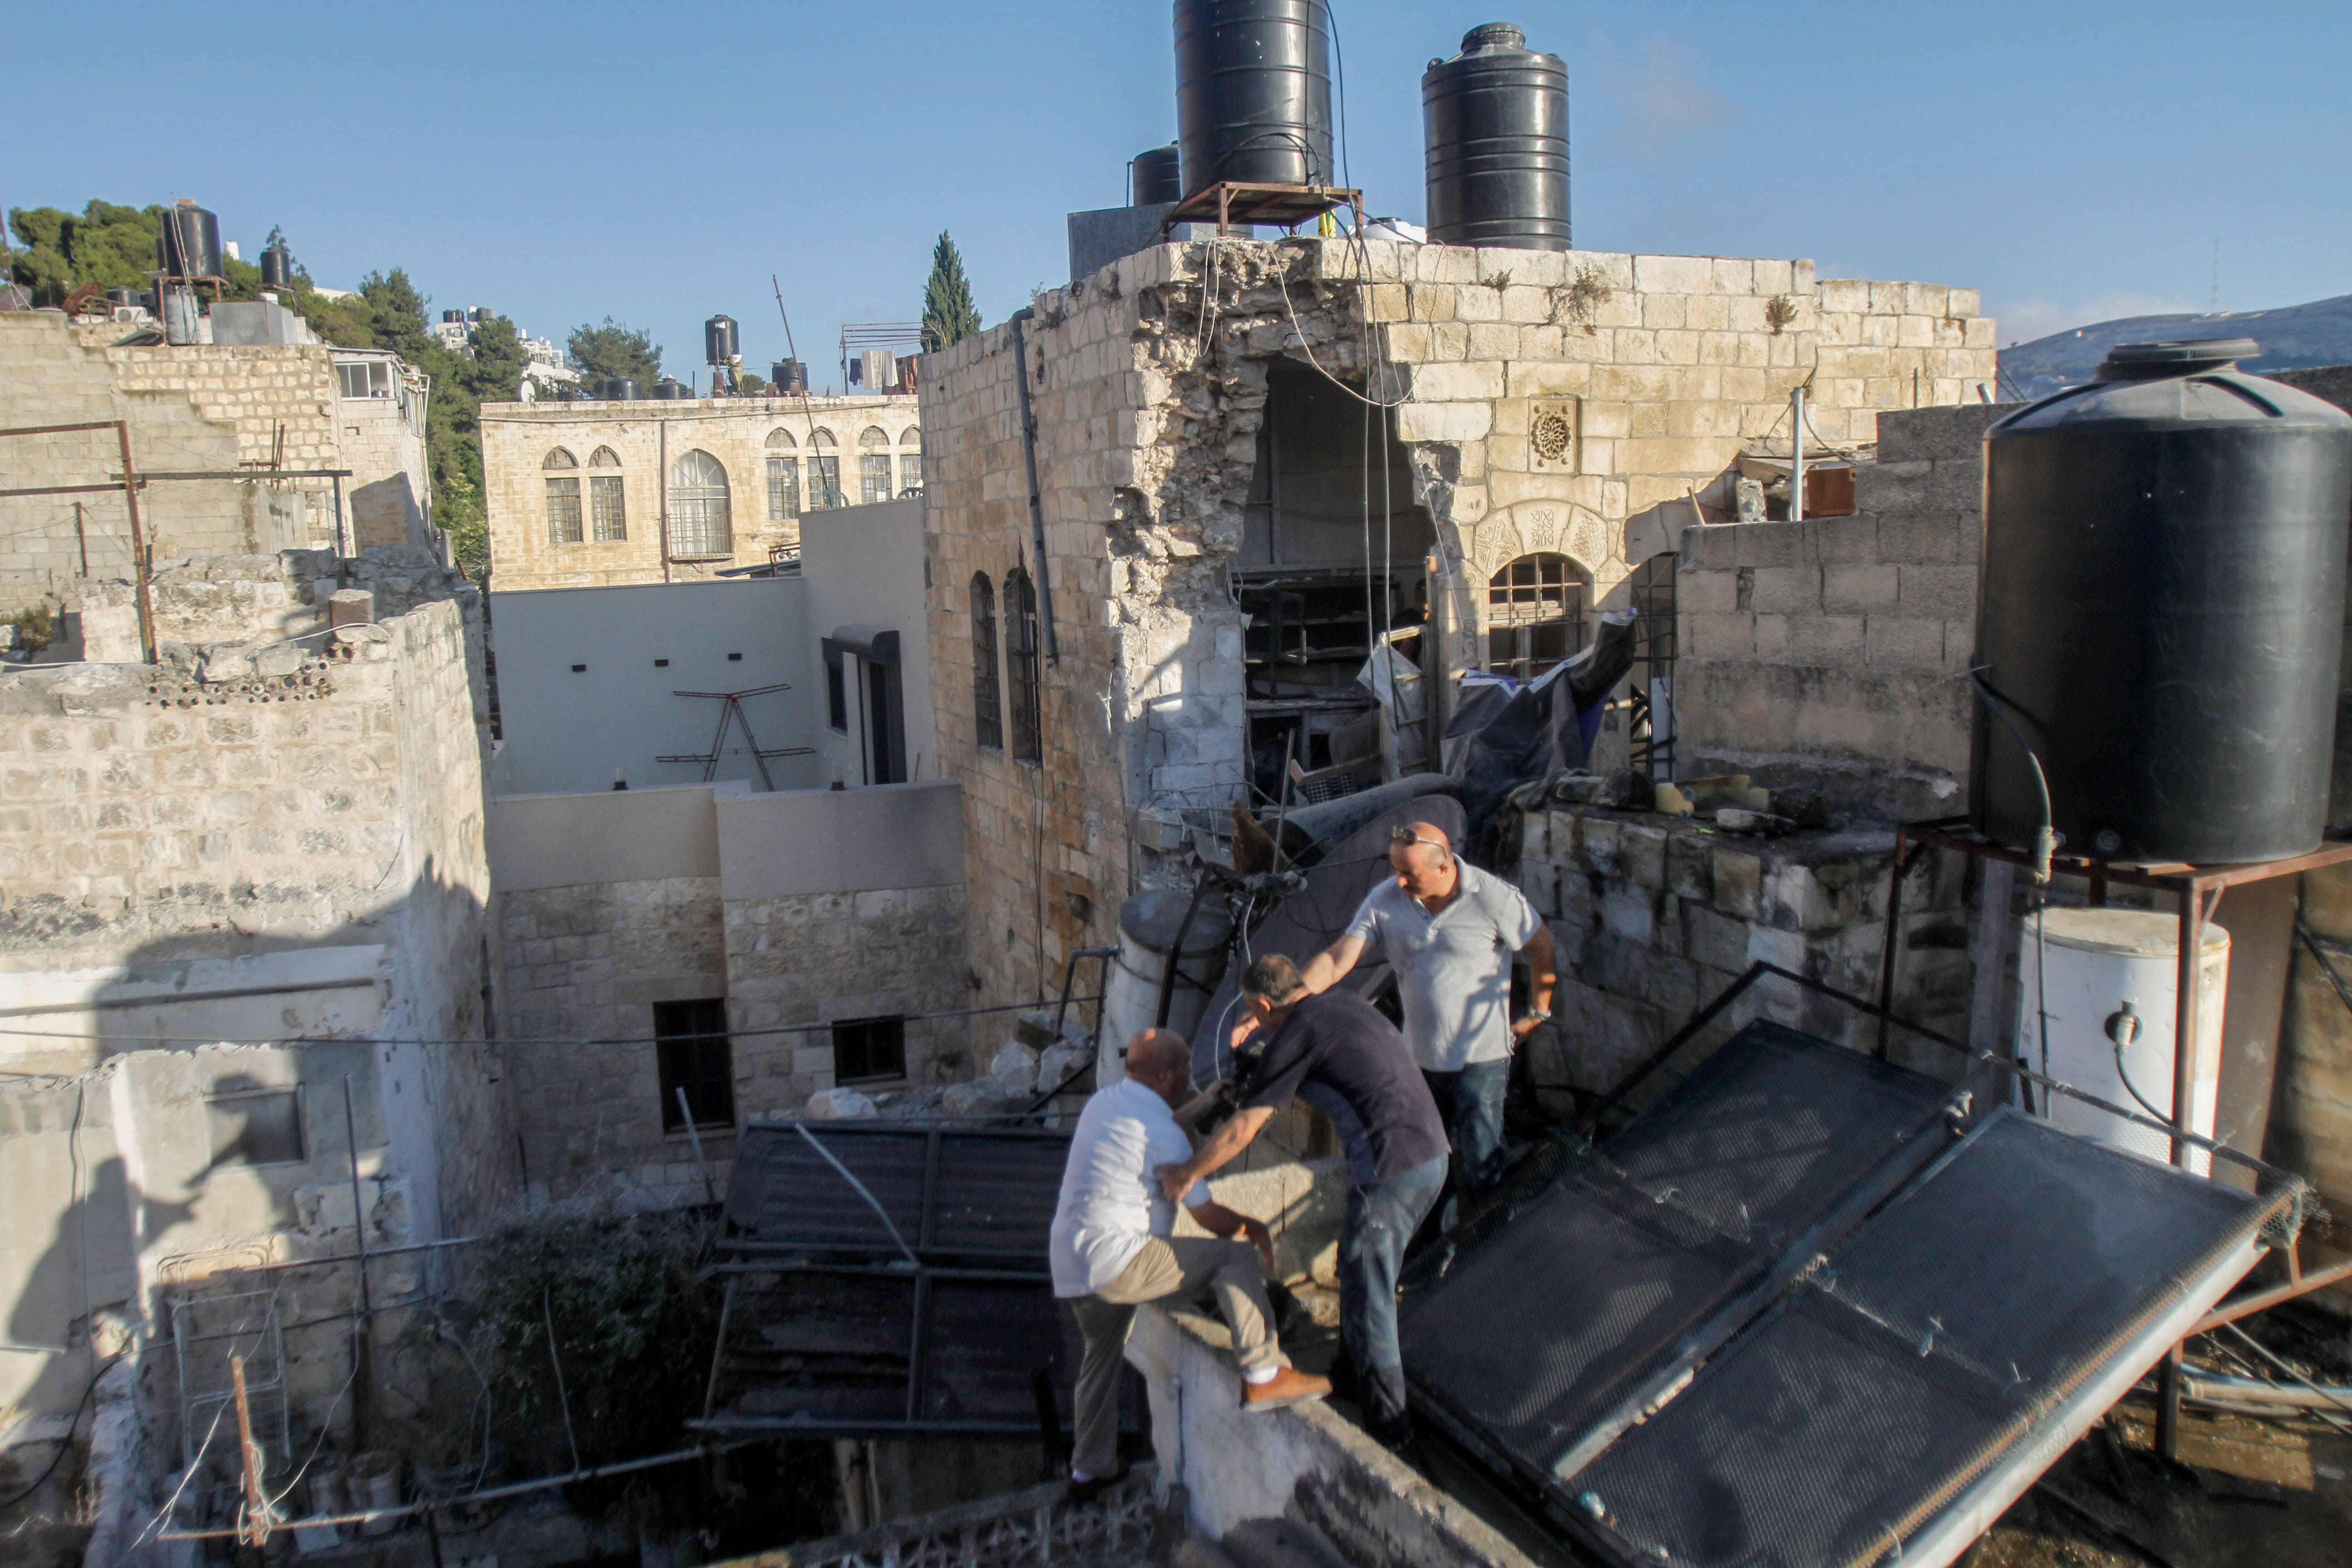 Palestinians inspect a damaged house that was bombed by the Israeli army during a raid in the Old City of Nablus in the occupied West Bank on 24 July 2022. (Reuters)